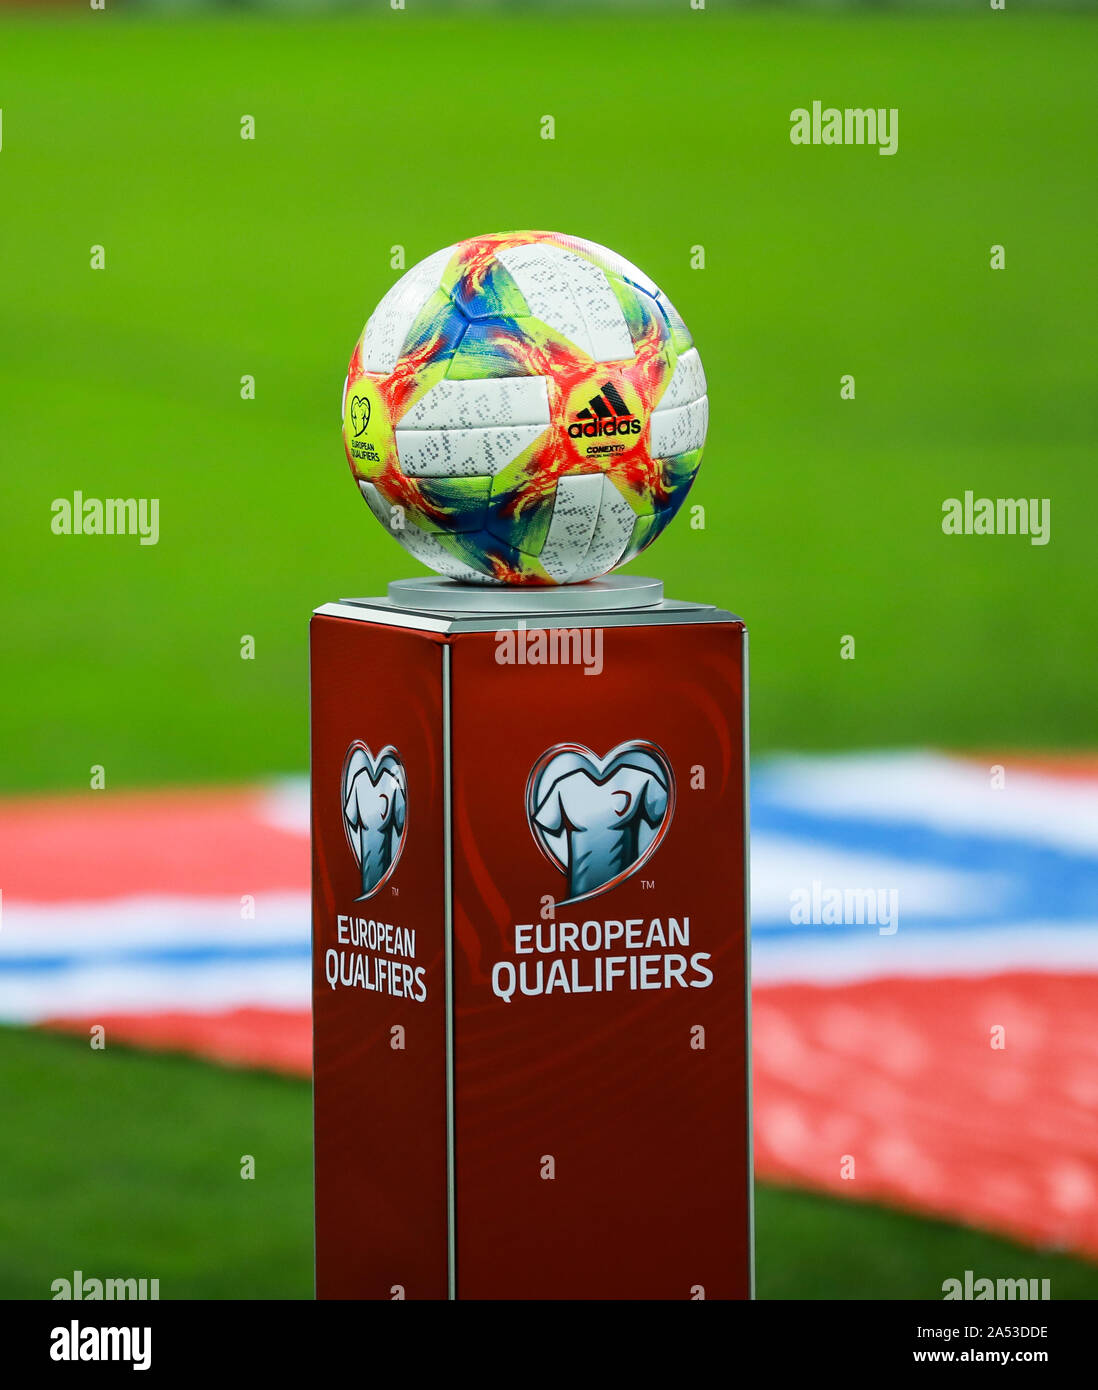 Bucharest, Romania - October 15, 2019: Details with the Adidas Conext 19  European qualifiers official soccer match ball on Arena Nationala stadium  Stock Photo - Alamy